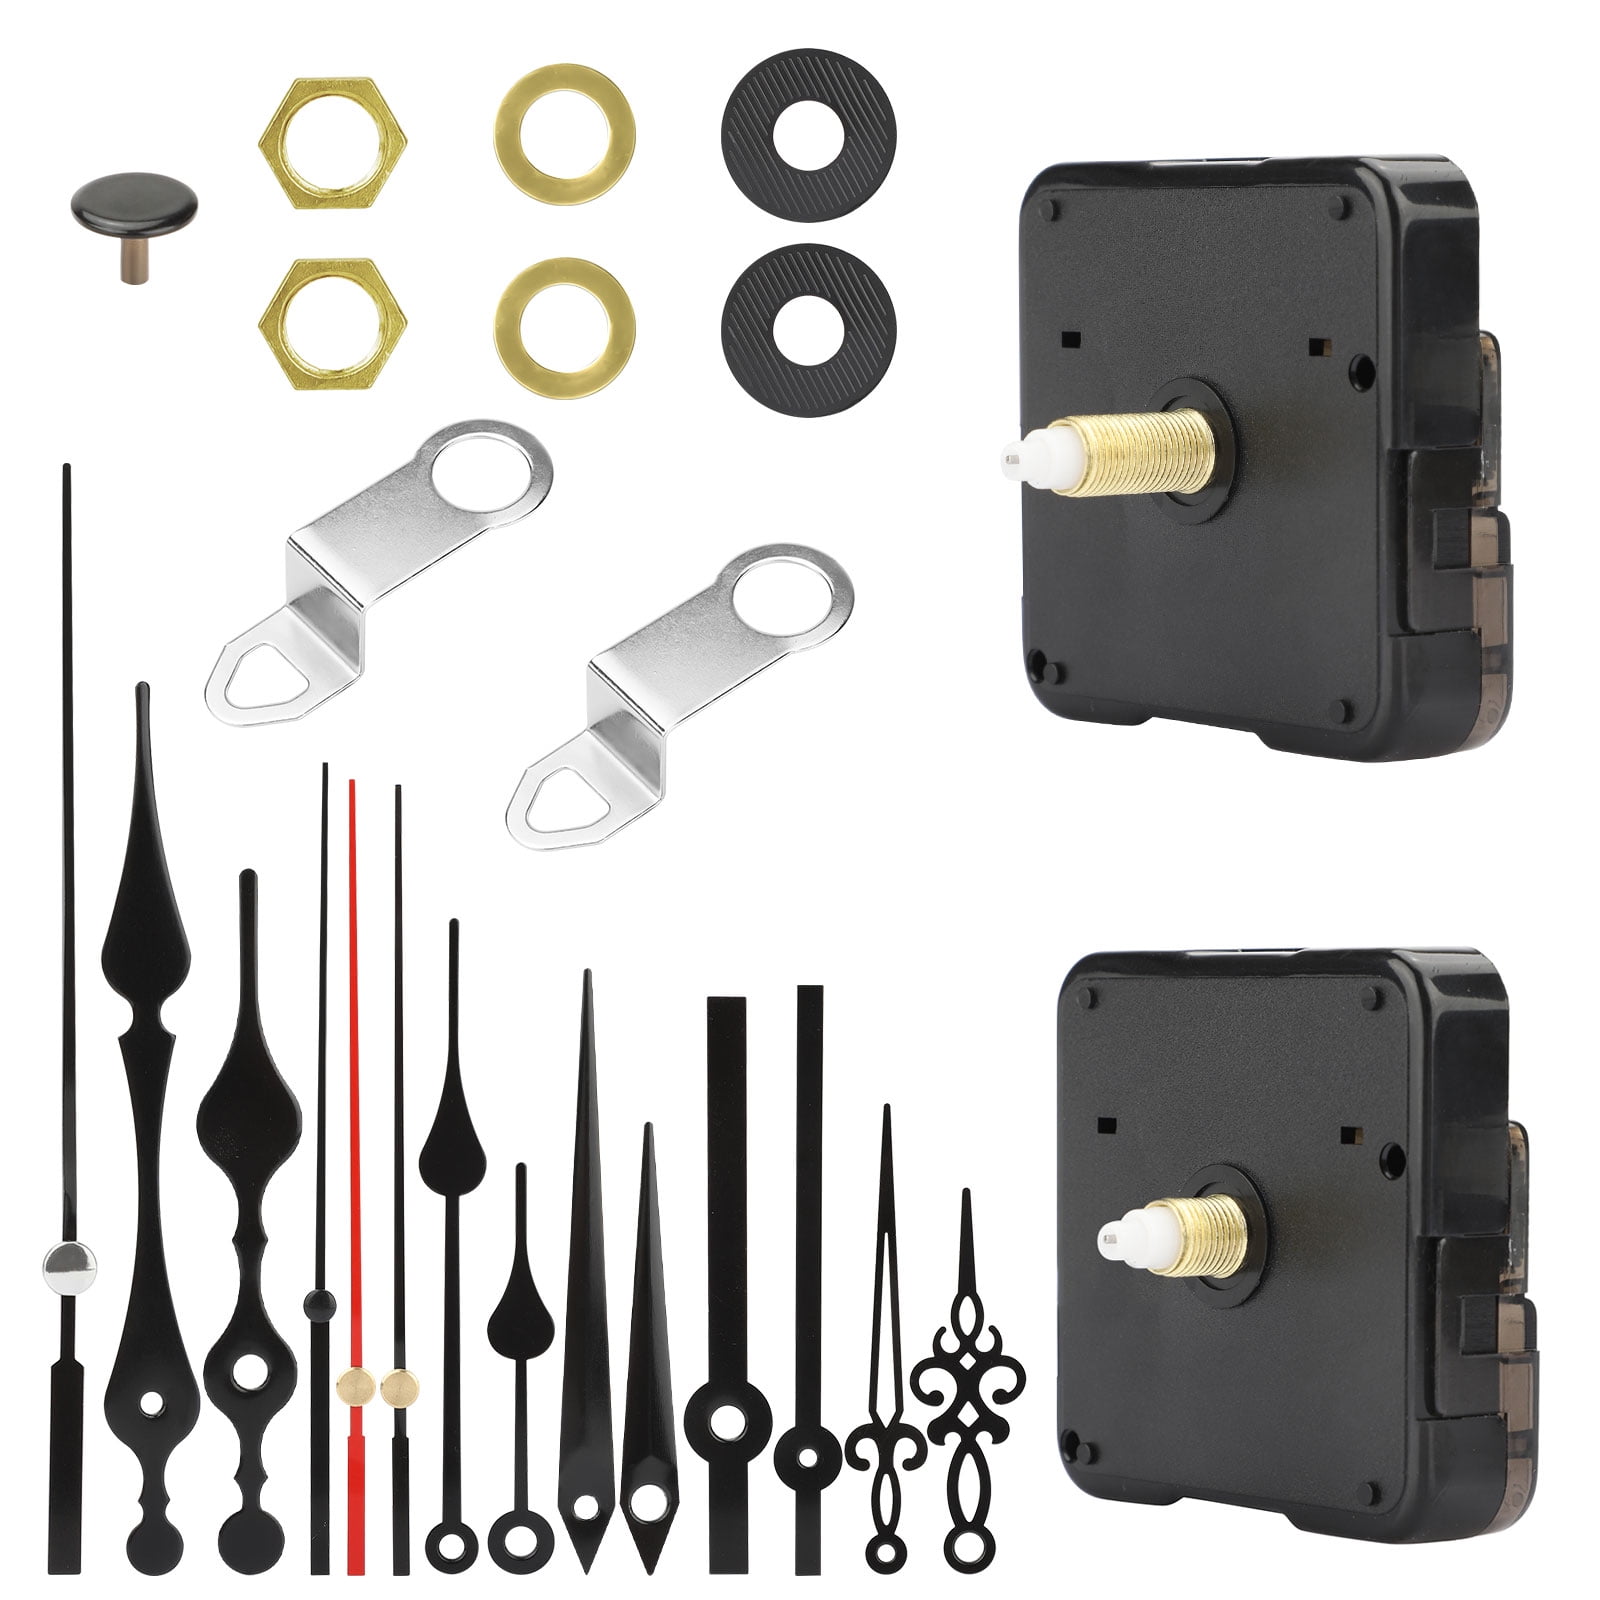 Replacement Quartz Wall Clock Movement Mechanism Motor With Hands & Fittings Kit 